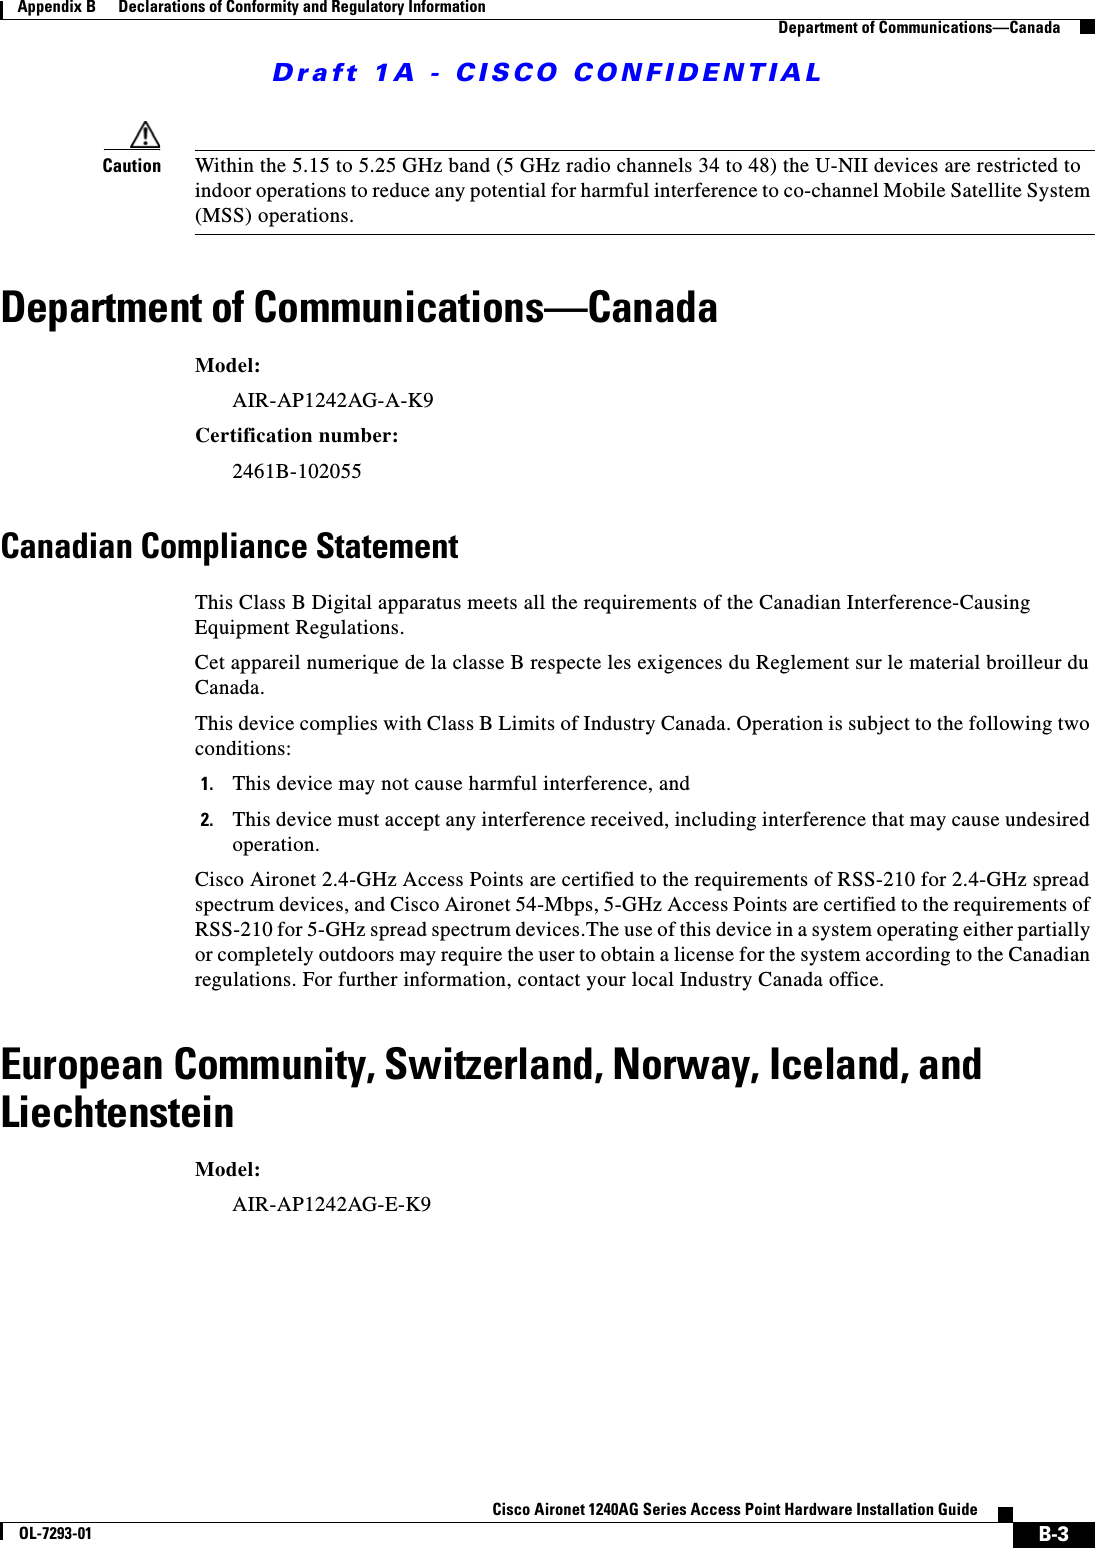 Draft 1A - CISCO CONFIDENTIALB-3Cisco Aironet 1240AG Series Access Point Hardware Installation GuideOL-7293-01Appendix B      Declarations of Conformity and Regulatory InformationDepartment of Communications—CanadaCaution Within the 5.15 to 5.25 GHz band (5 GHz radio channels 34 to 48) the U-NII devices are restricted to indoor operations to reduce any potential for harmful interference to co-channel Mobile Satellite System (MSS) operations.Department of Communications—CanadaModel:AIR-AP1242AG-A-K9 Certification number: 2461B-102055 Canadian Compliance StatementThis Class B Digital apparatus meets all the requirements of the Canadian Interference-Causing Equipment Regulations.Cet appareil numerique de la classe B respecte les exigences du Reglement sur le material broilleur du Canada.This device complies with Class B Limits of Industry Canada. Operation is subject to the following two conditions:1. This device may not cause harmful interference, and2. This device must accept any interference received, including interference that may cause undesired operation.Cisco Aironet 2.4-GHz Access Points are certified to the requirements of RSS-210 for 2.4-GHz spread spectrum devices, and Cisco Aironet 54-Mbps, 5-GHz Access Points are certified to the requirements of RSS-210 for 5-GHz spread spectrum devices.The use of this device in a system operating either partially or completely outdoors may require the user to obtain a license for the system according to the Canadian regulations. For further information, contact your local Industry Canada office.European Community, Switzerland, Norway, Iceland, and LiechtensteinModel:AIR-AP1242AG-E-K9 